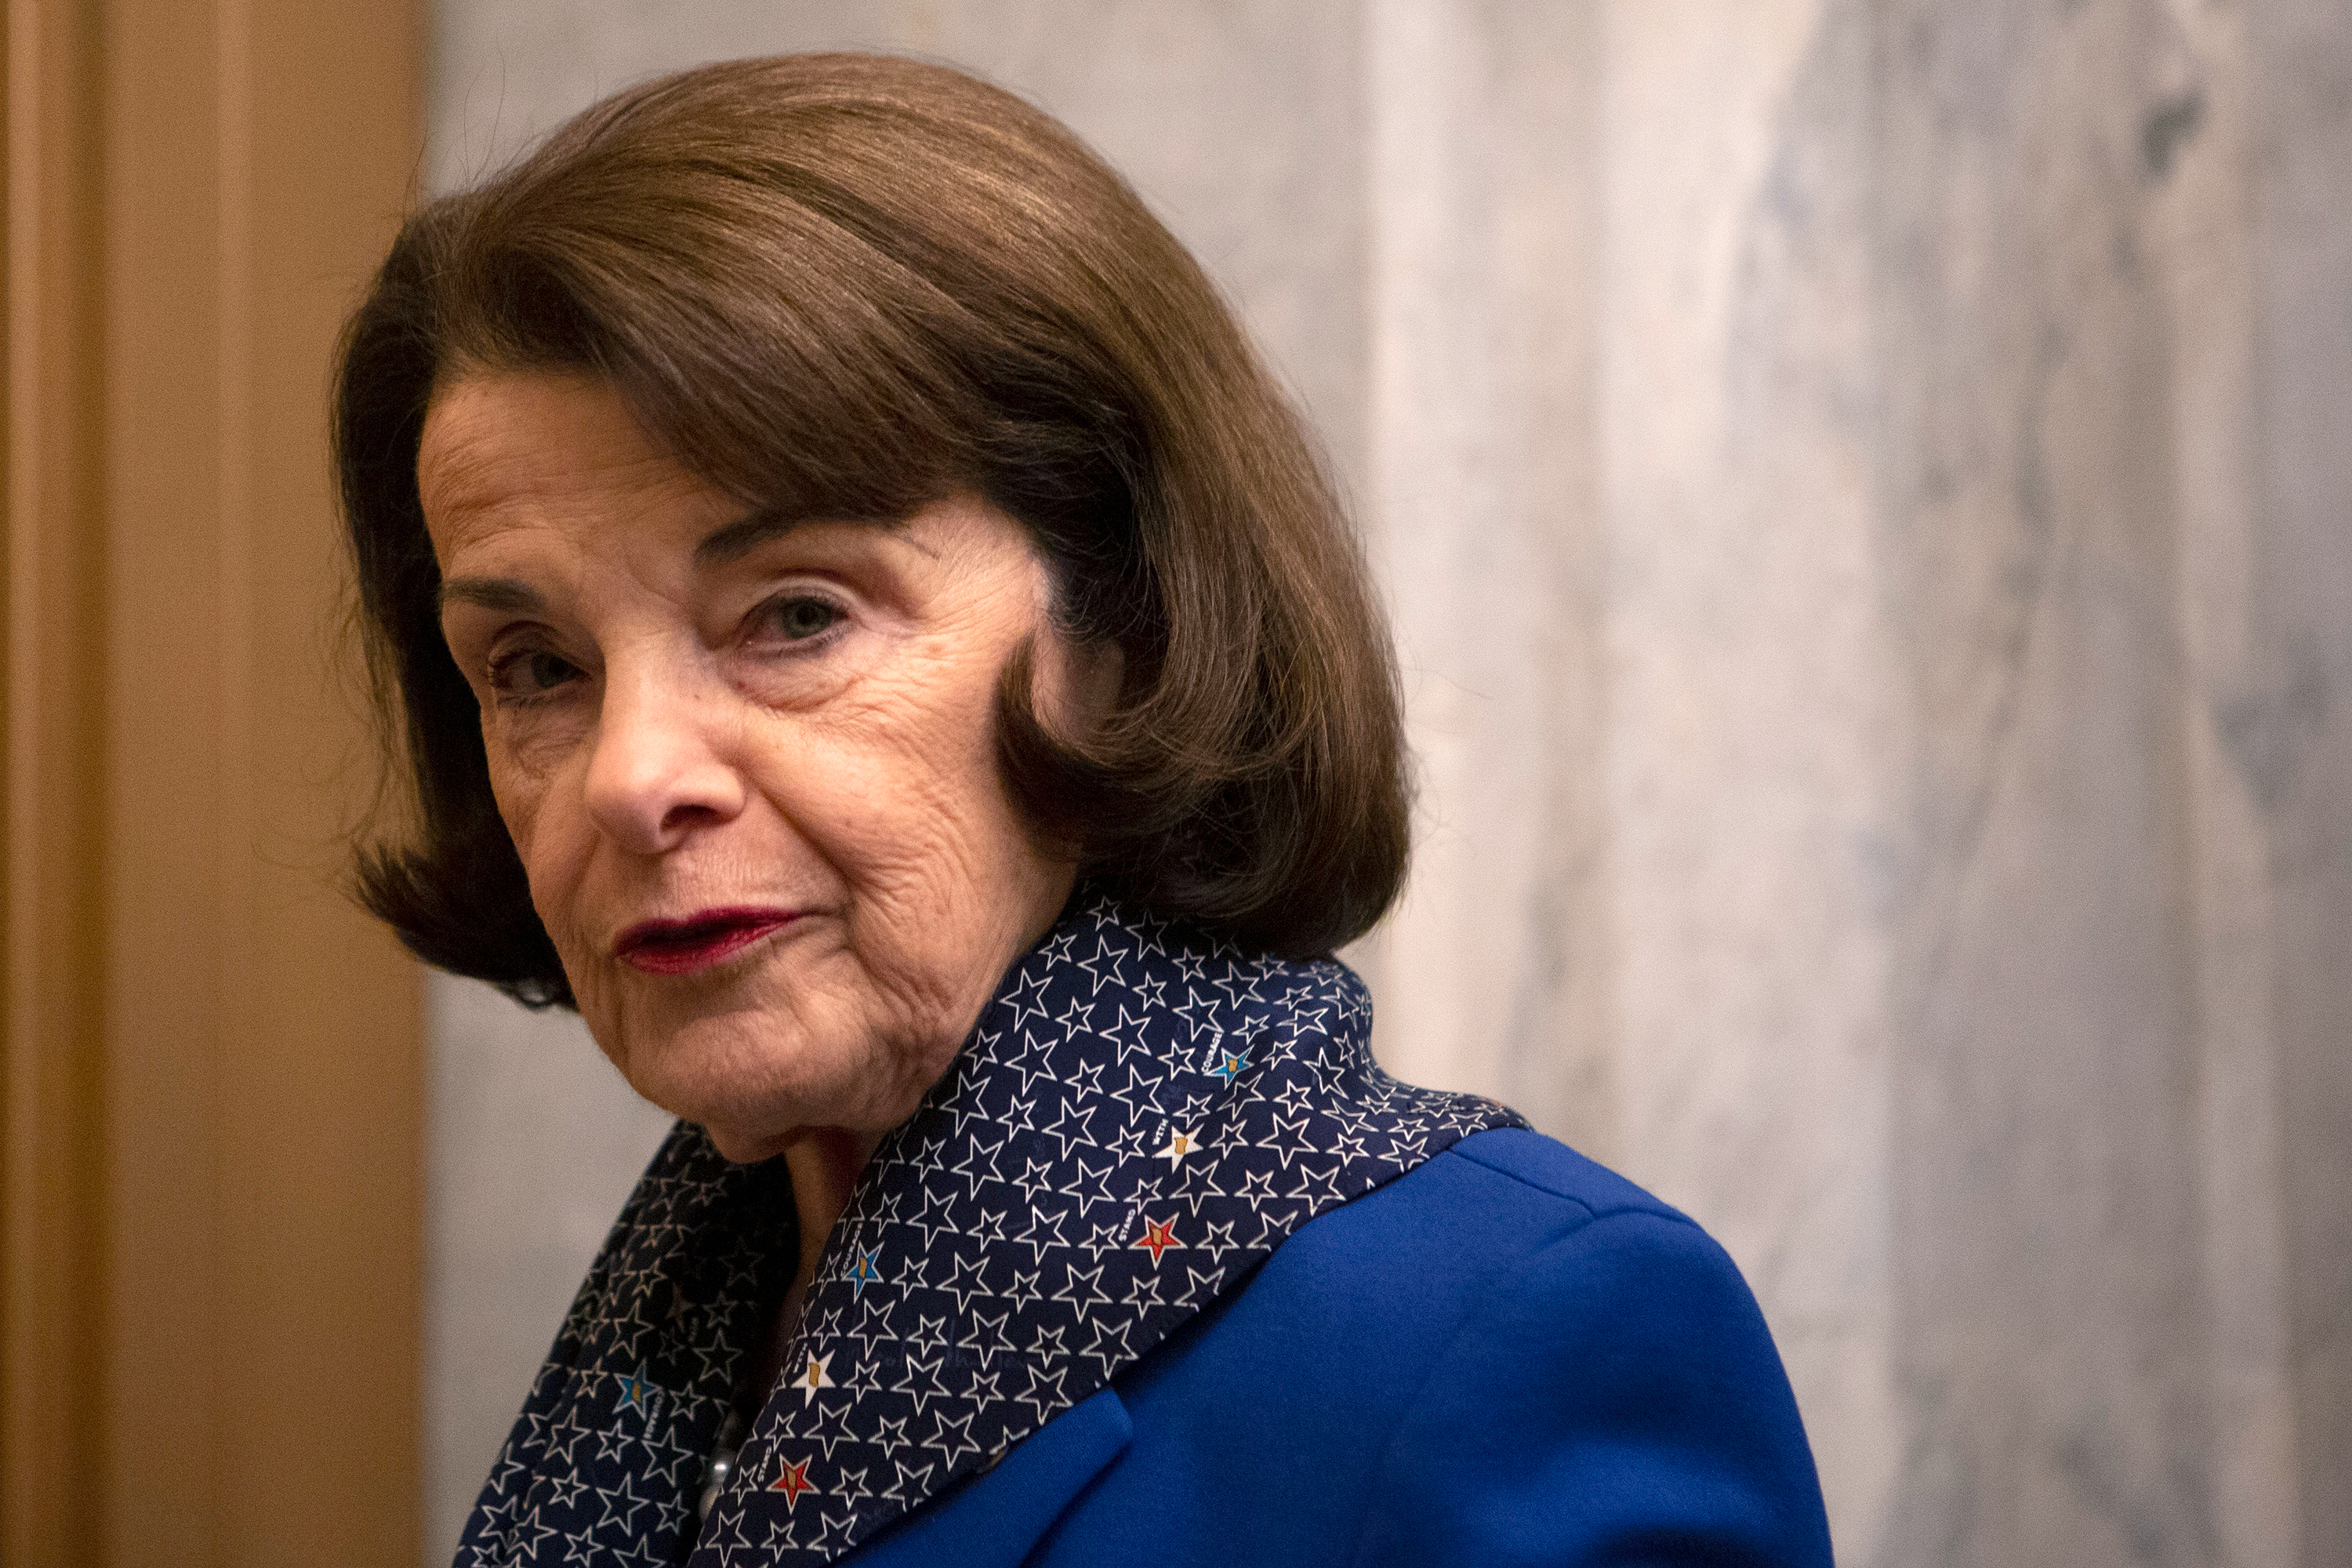 Sen. Dianne Feinstein waits to board an elevator after a vote on Capitol Hill in Washington, DC, in January 2019.